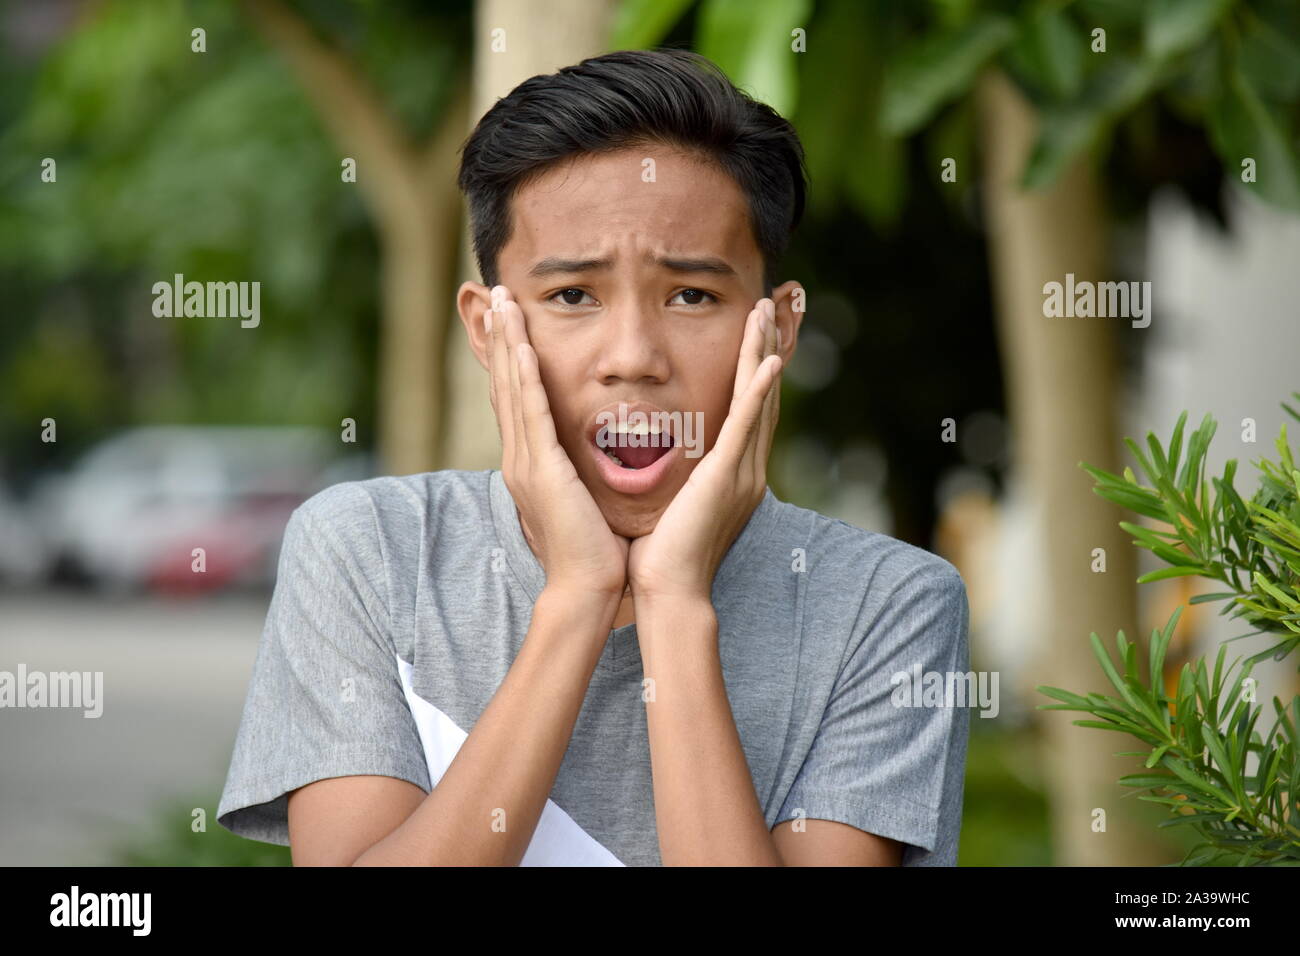 An A Shocked Male Juvenile Stock Photo